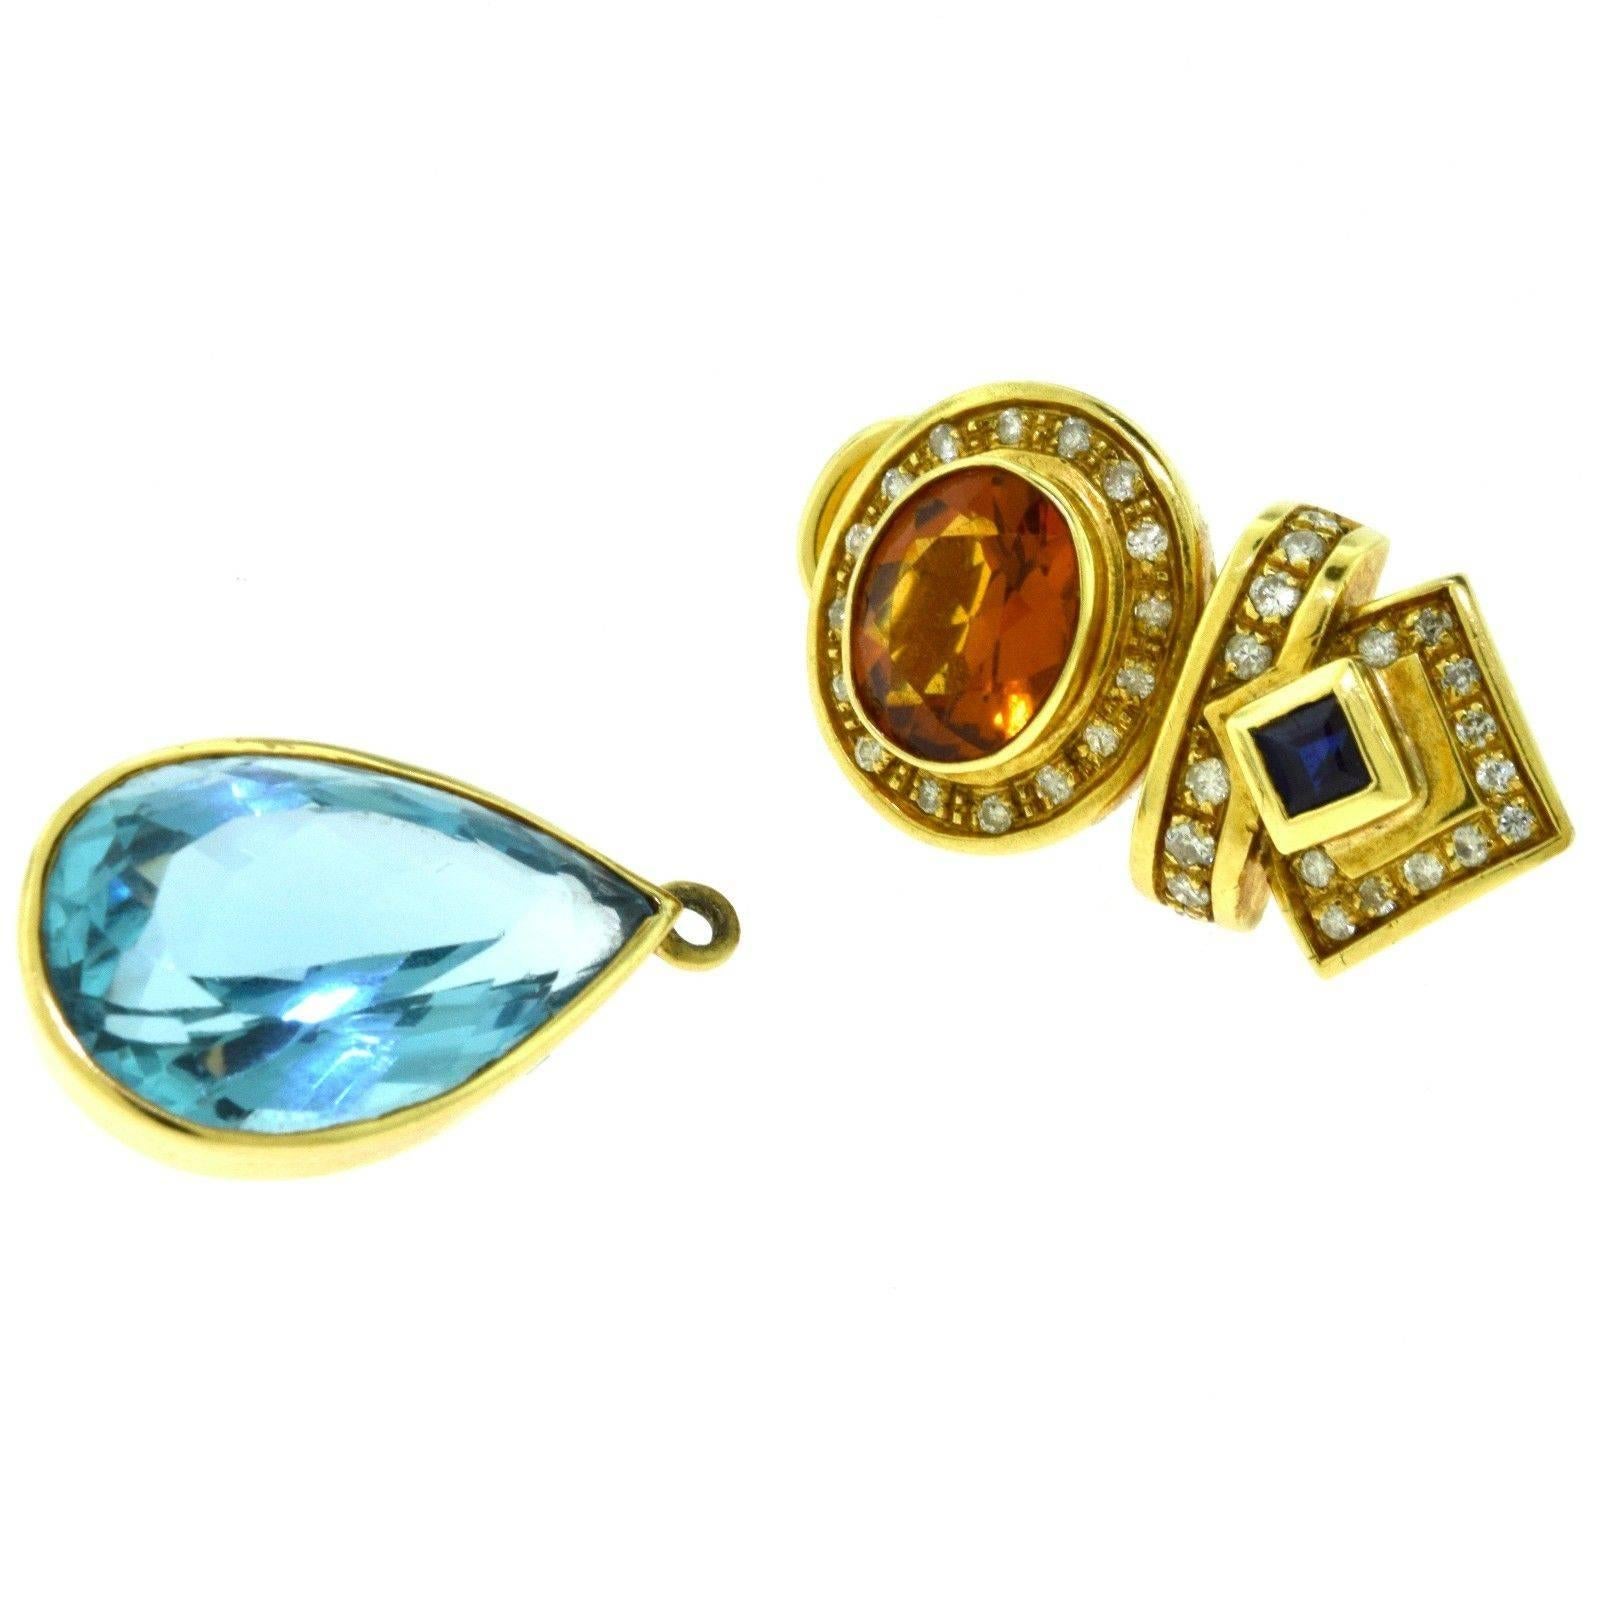 Blue Topaz, Diamond, Citrine and Sapphire Earring and Necklace Two-Piece Set For Sale 6